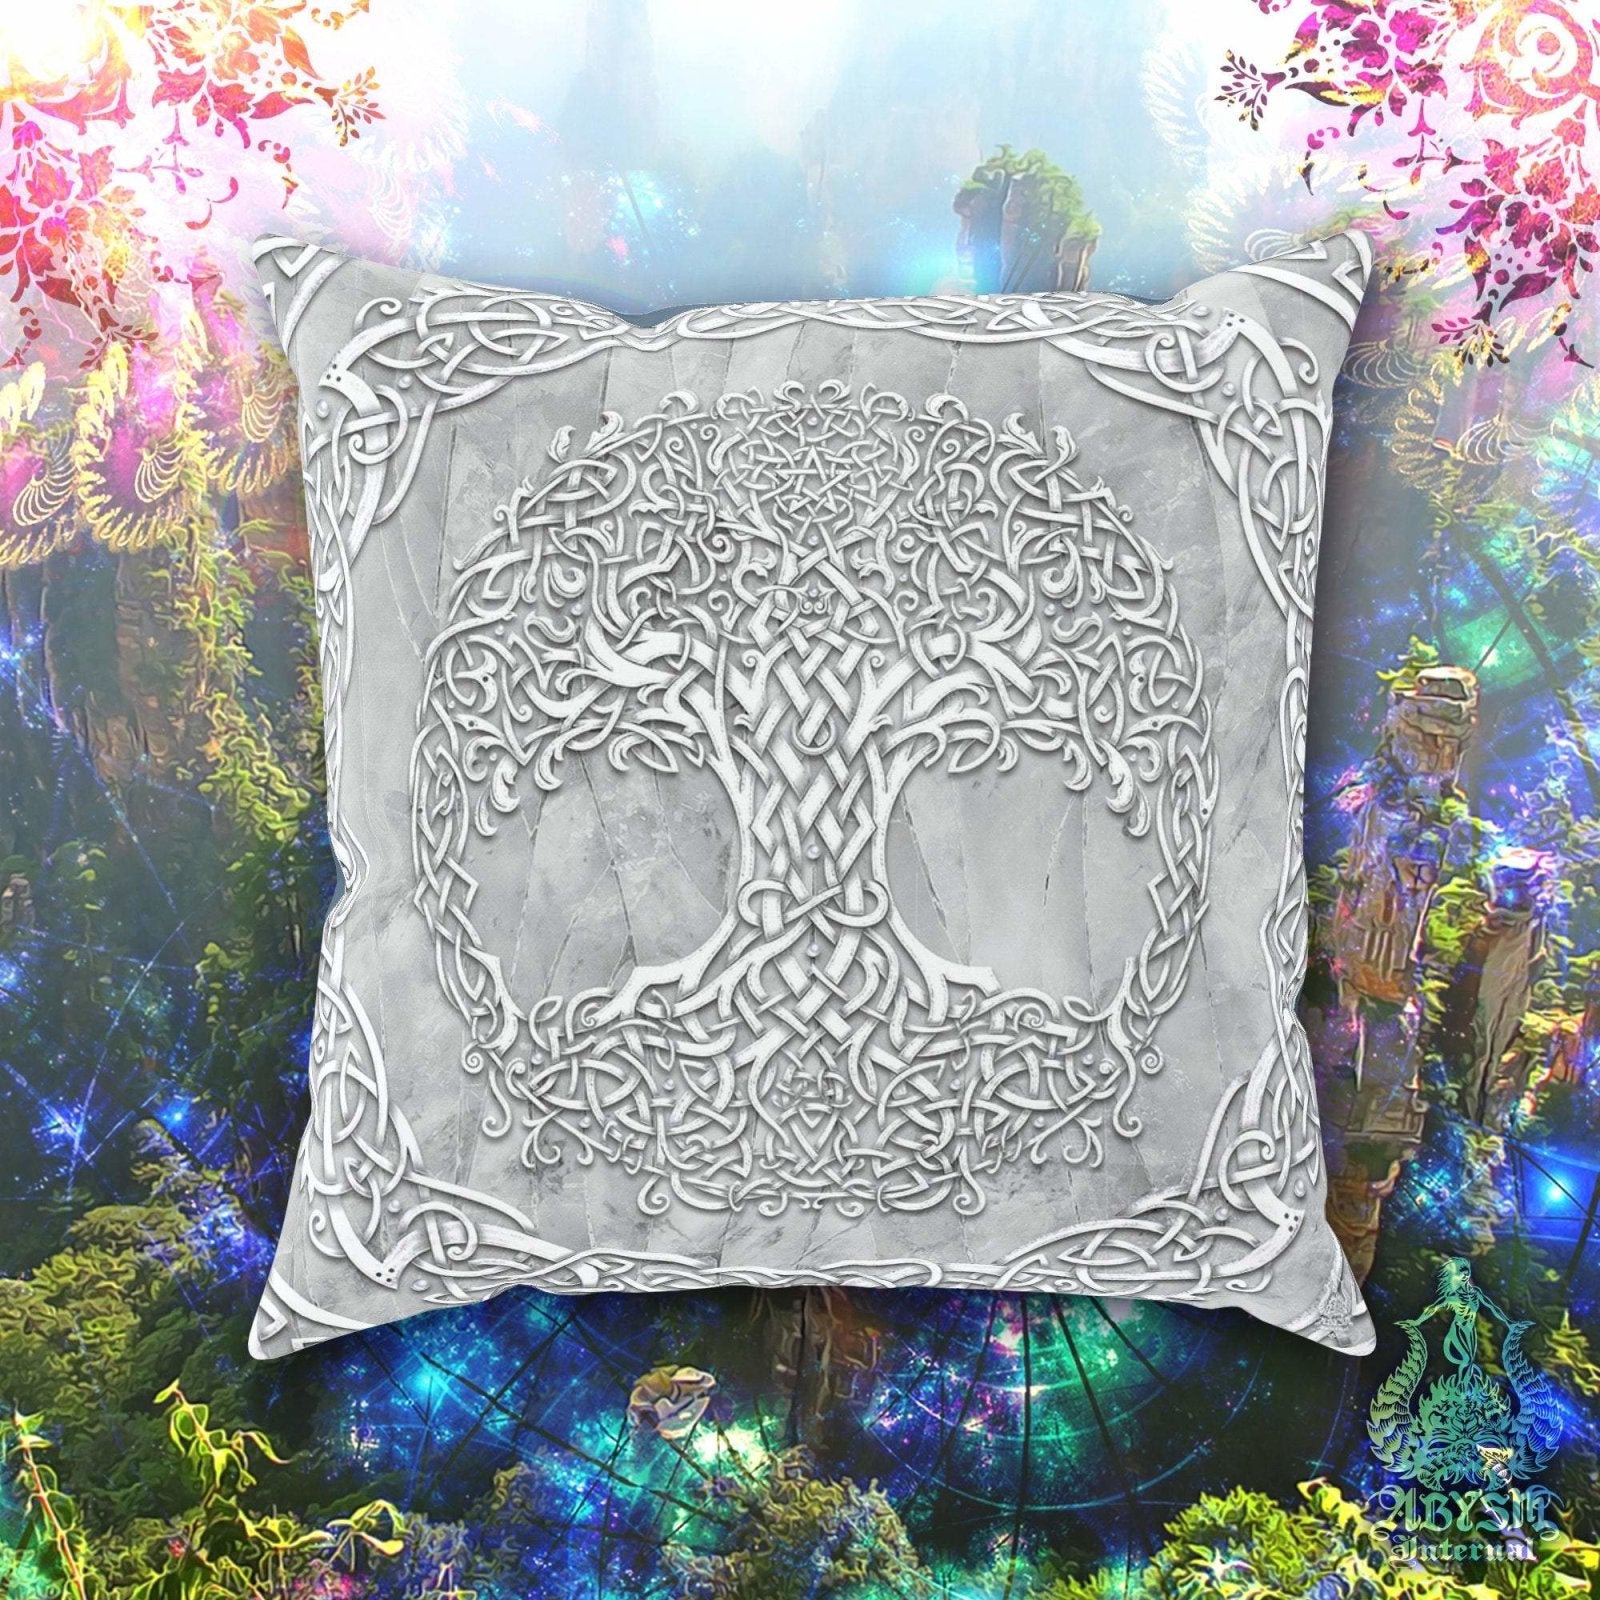 Celtic Throw Pillow, Decorative Accent Cushion, Tree of Life, Pagan Room Decor, Witchy Art, Funky and Eclectic Home - Stone - Abysm Internal